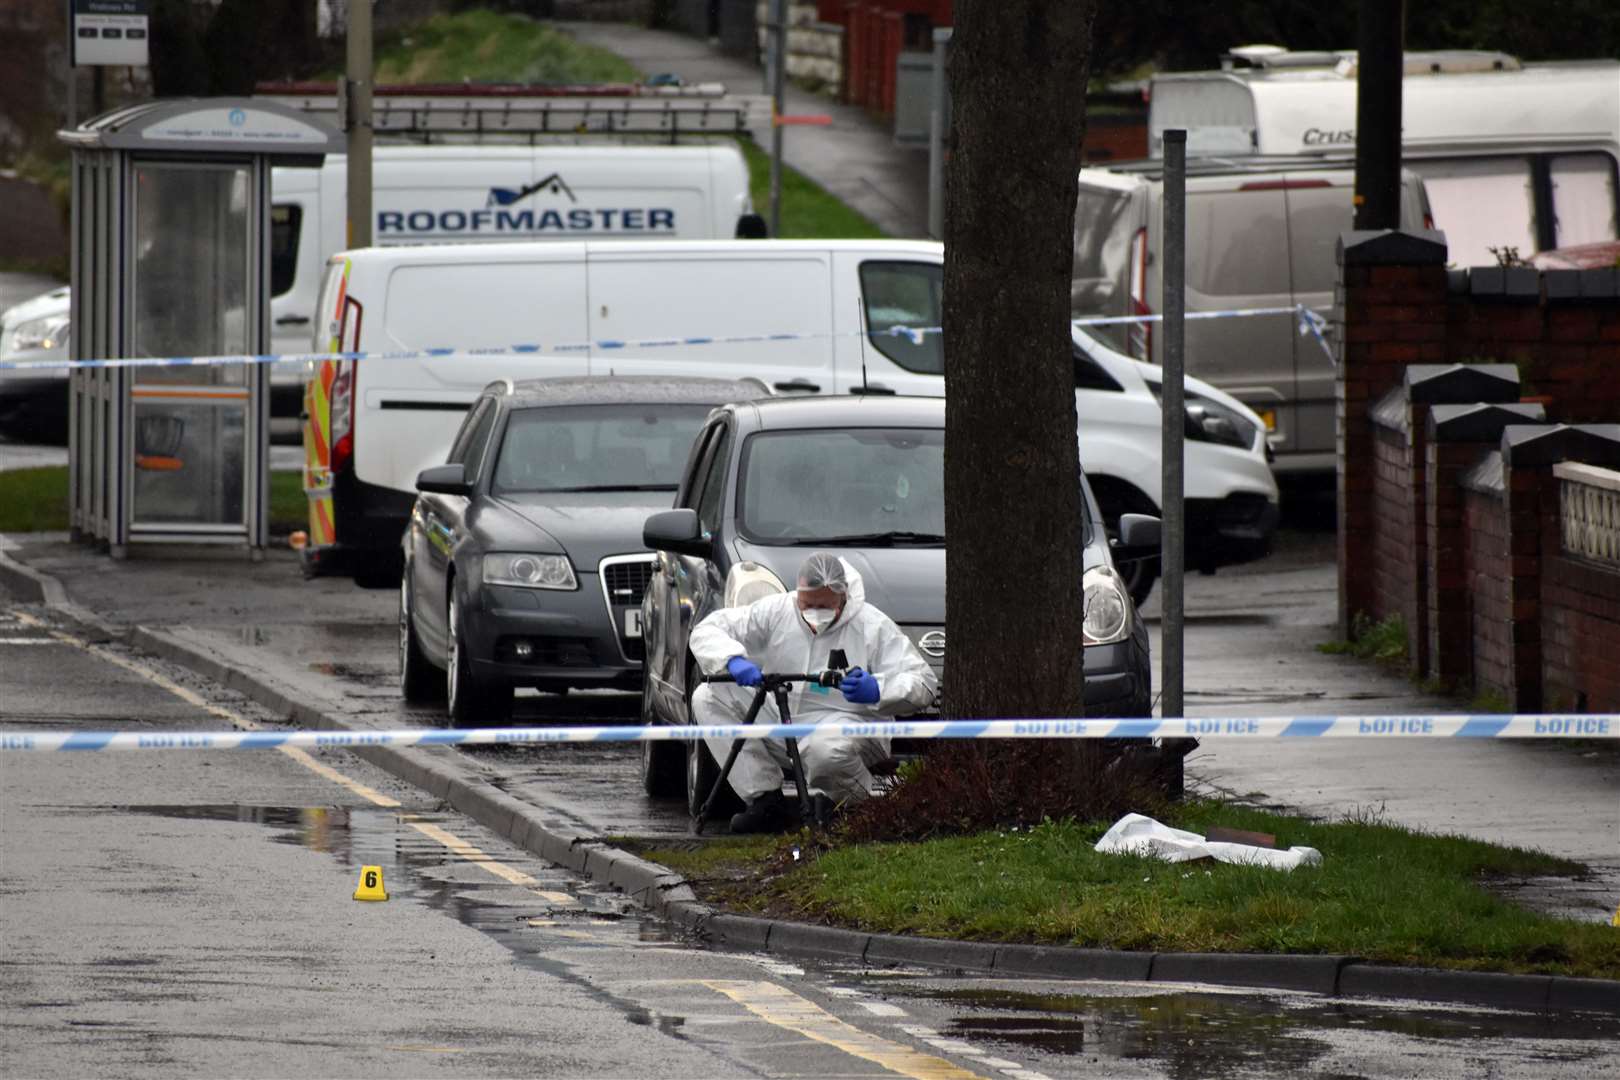 Police in Pensnett Road after the alleged double murder last year (Matthew Cooper/PA)